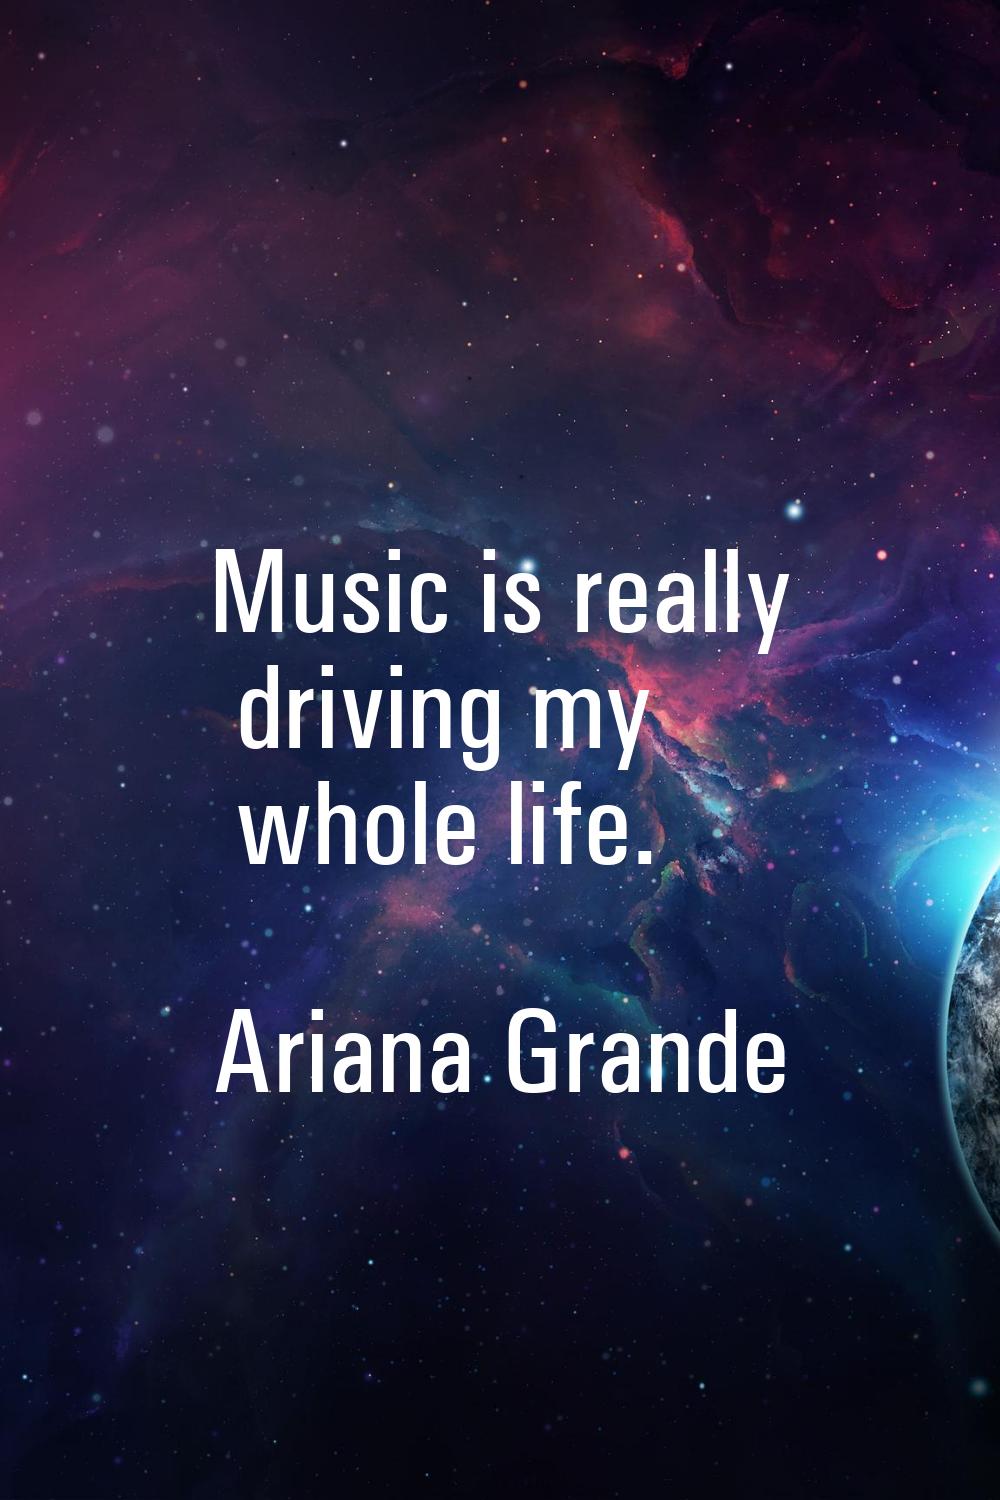 Music is really driving my whole life.